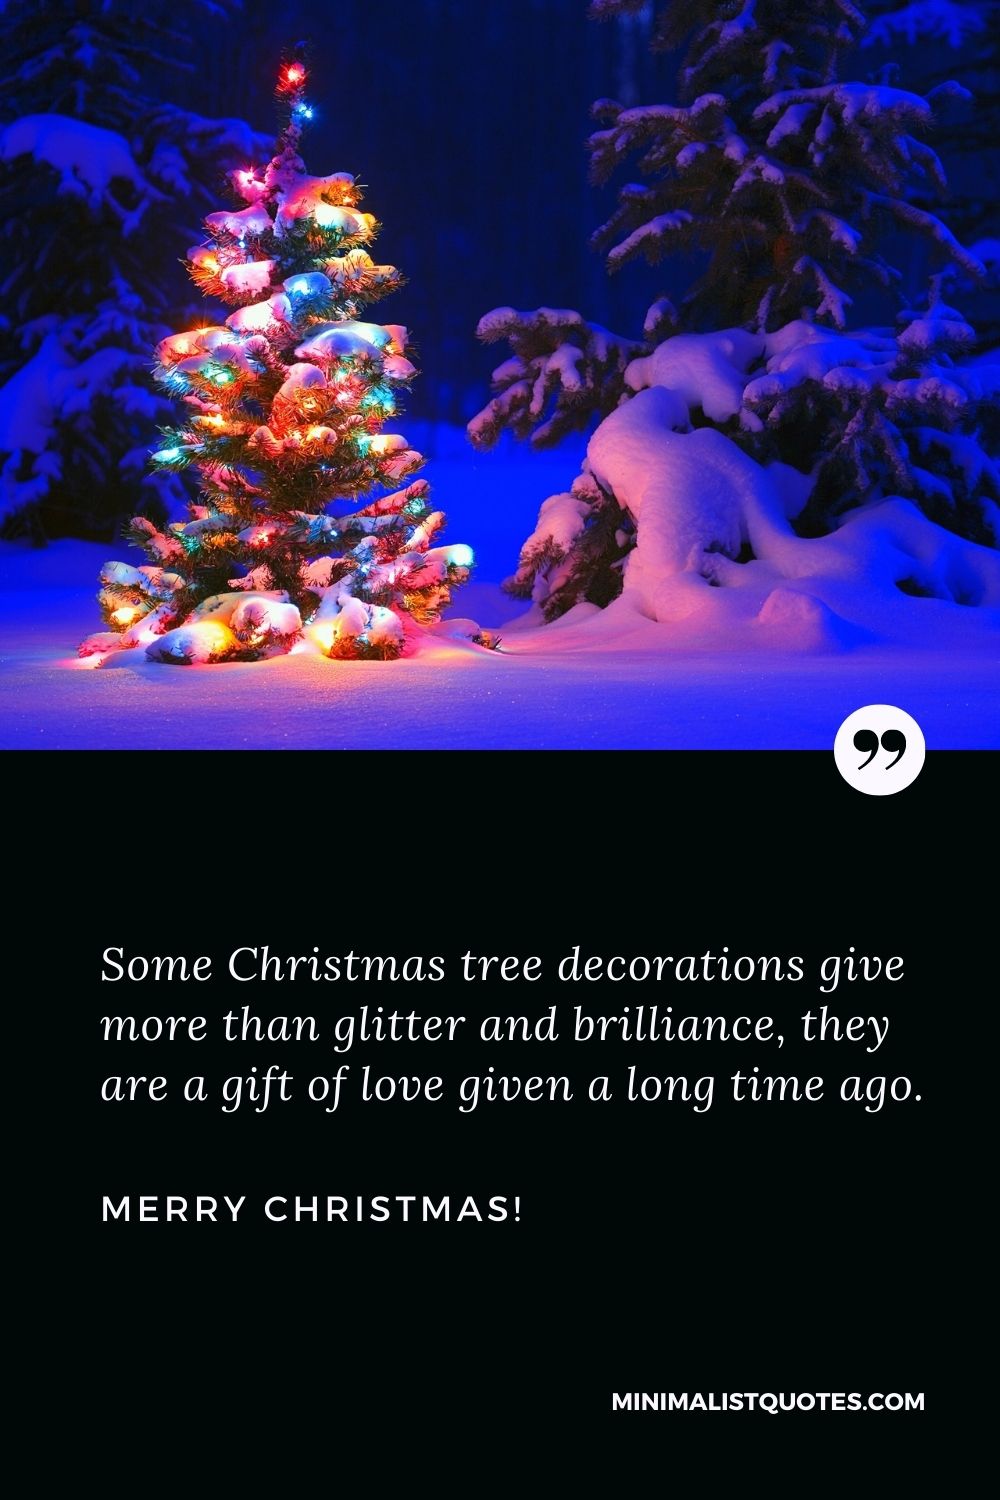 Christmas tree quotes: Some Christmas tree decorations give more than glitter and brilliance, they are a gift of love given a long time ago. Merry Christmas!